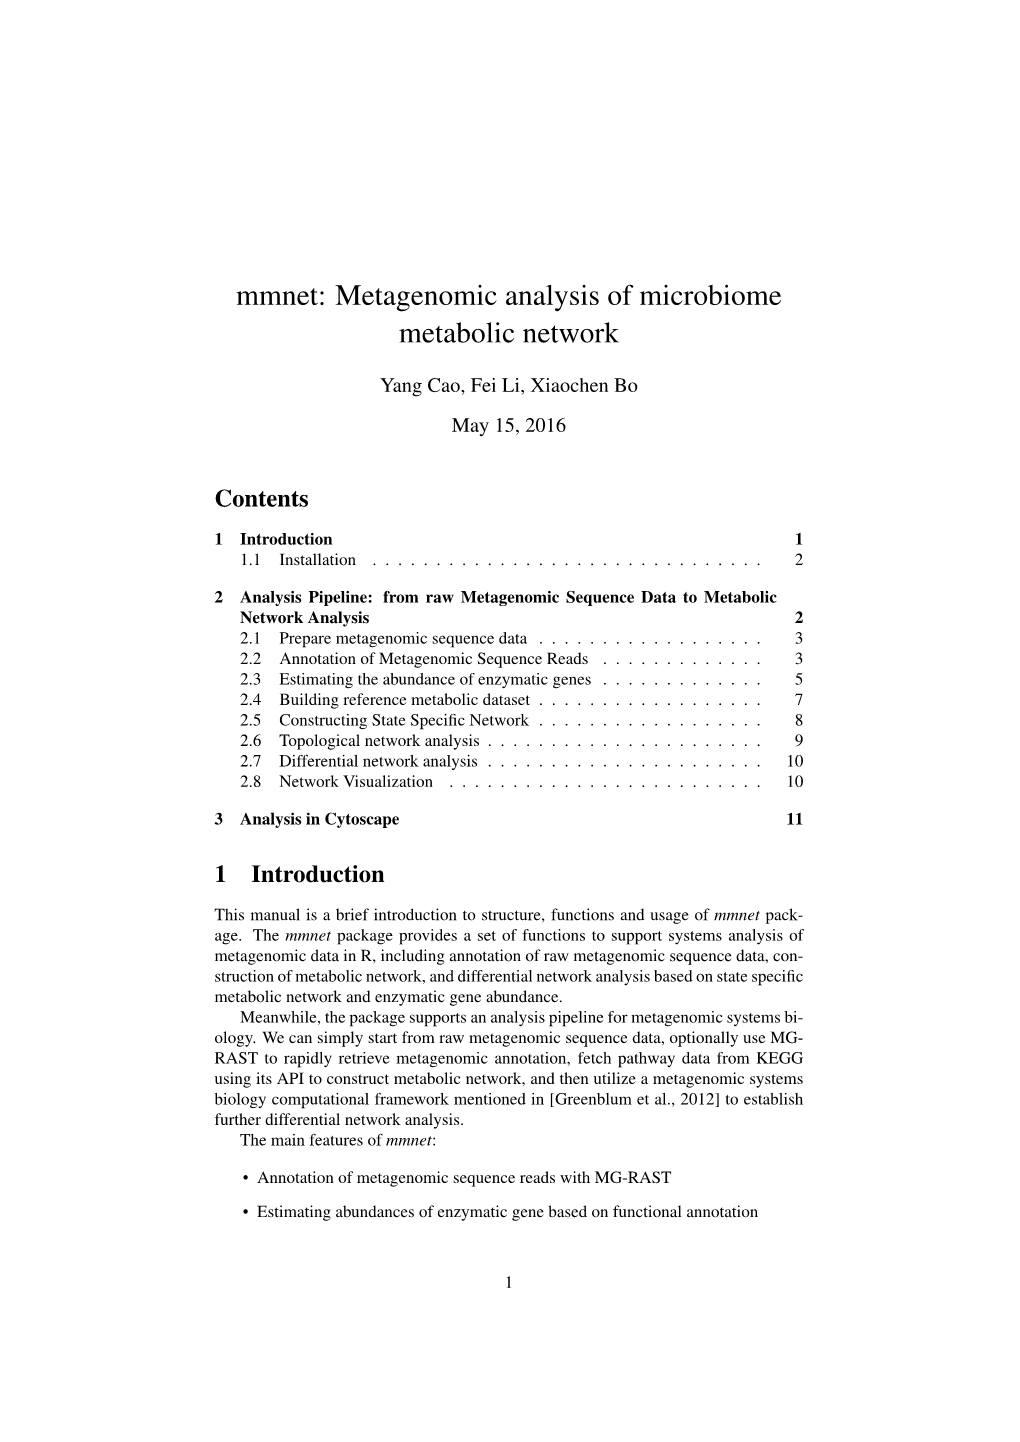 Mmnet: Metagenomic Analysis of Microbiome Metabolic Network